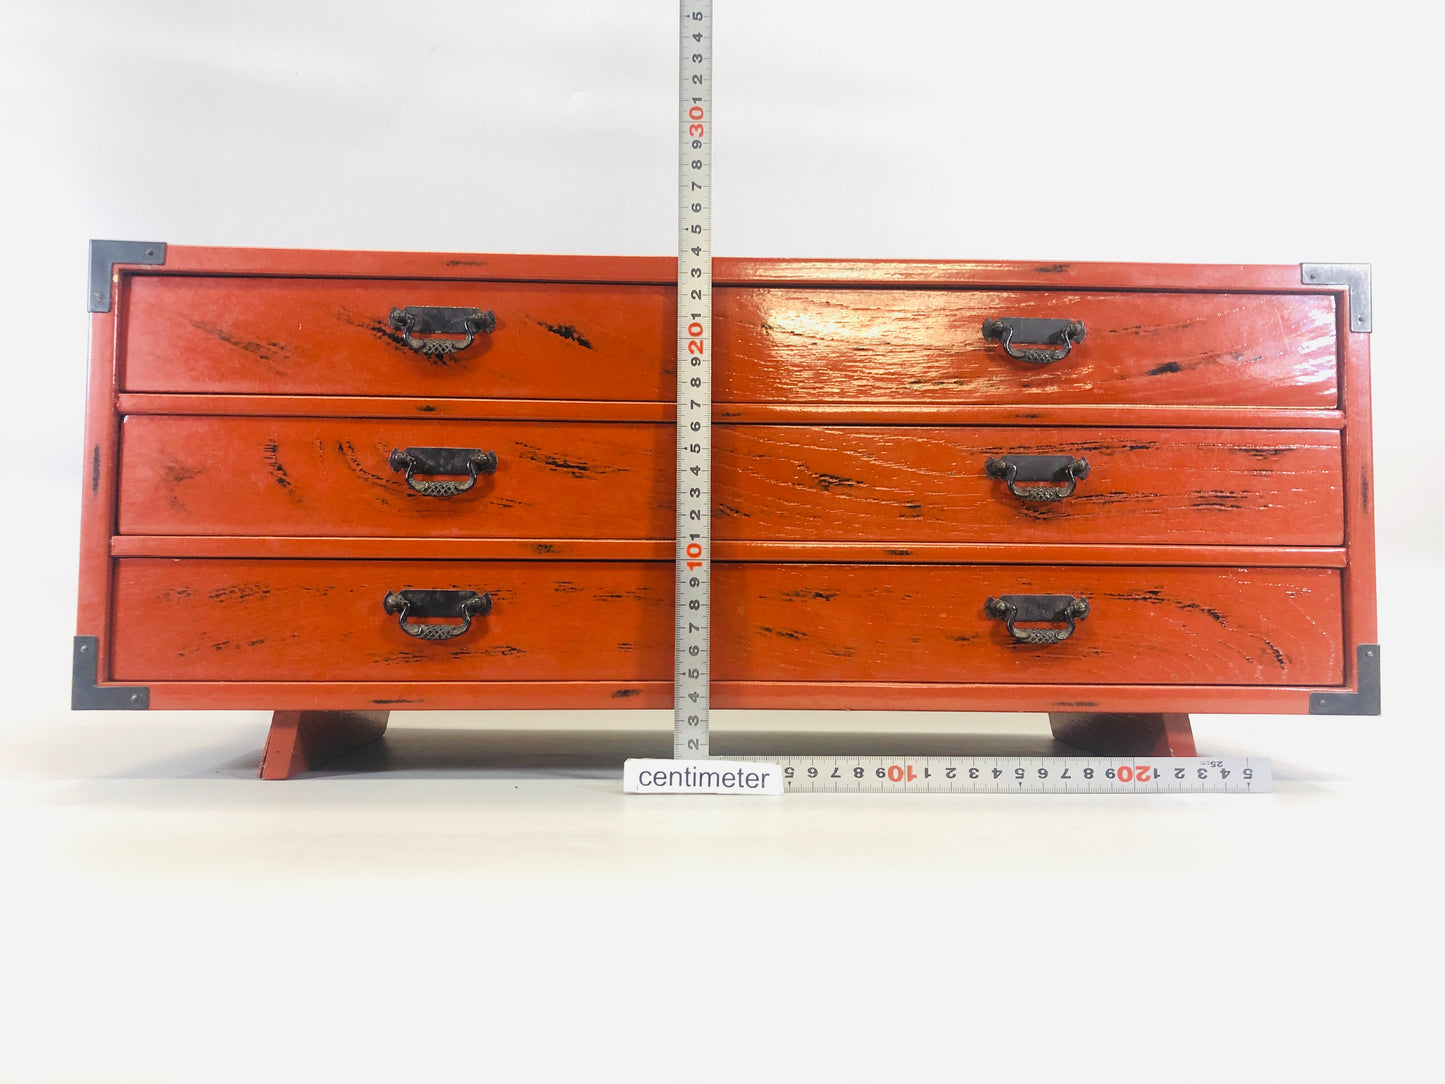 Y5471 TANSU 3-tier small drawer chest  with legs Negoro lacquer Japan antique